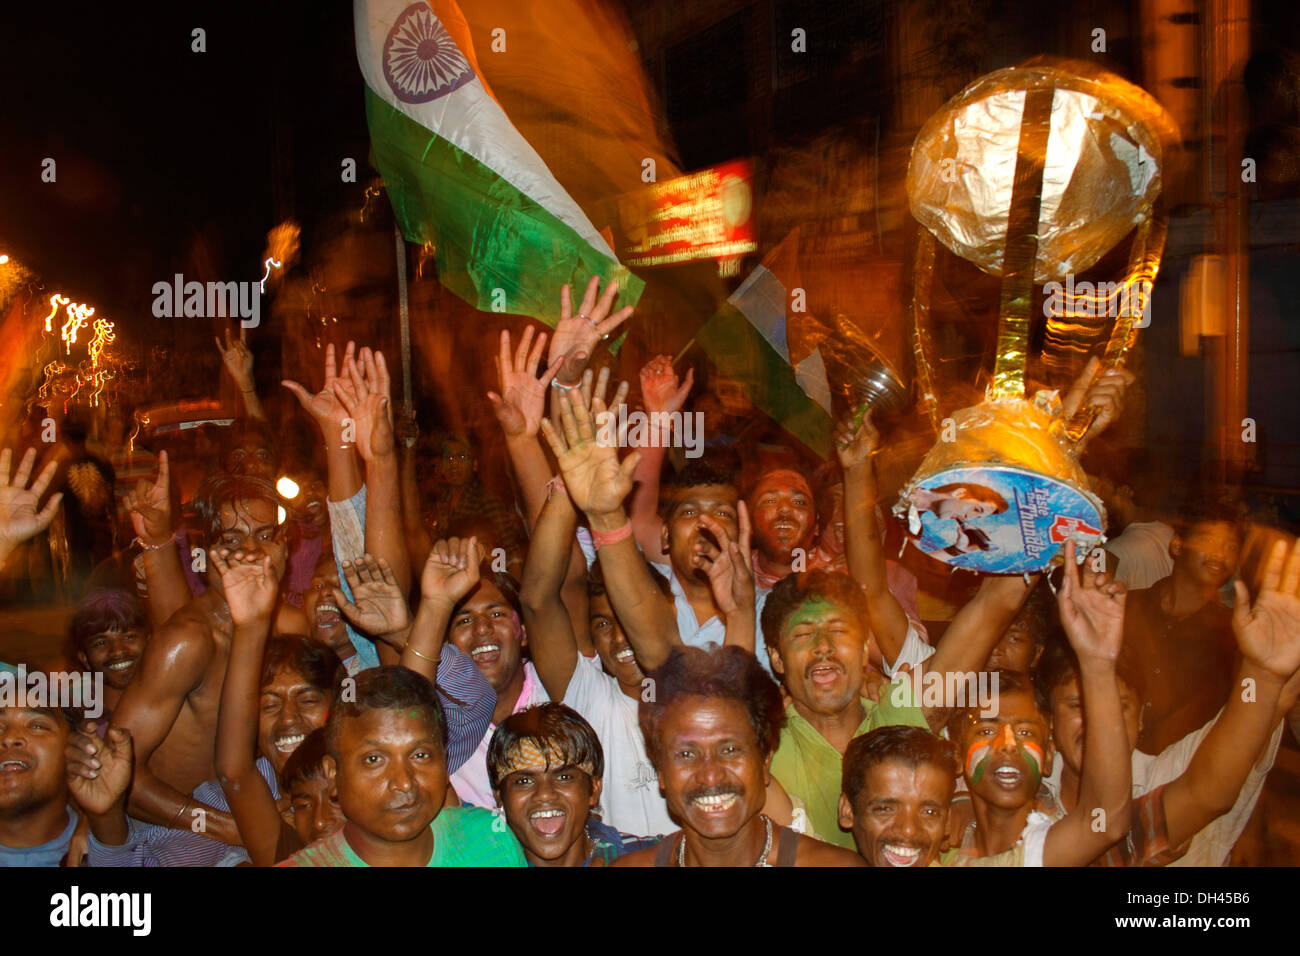 Peoples celebrating Indian victory of Cricket World Cup Kolkata India Asia Stock Photo